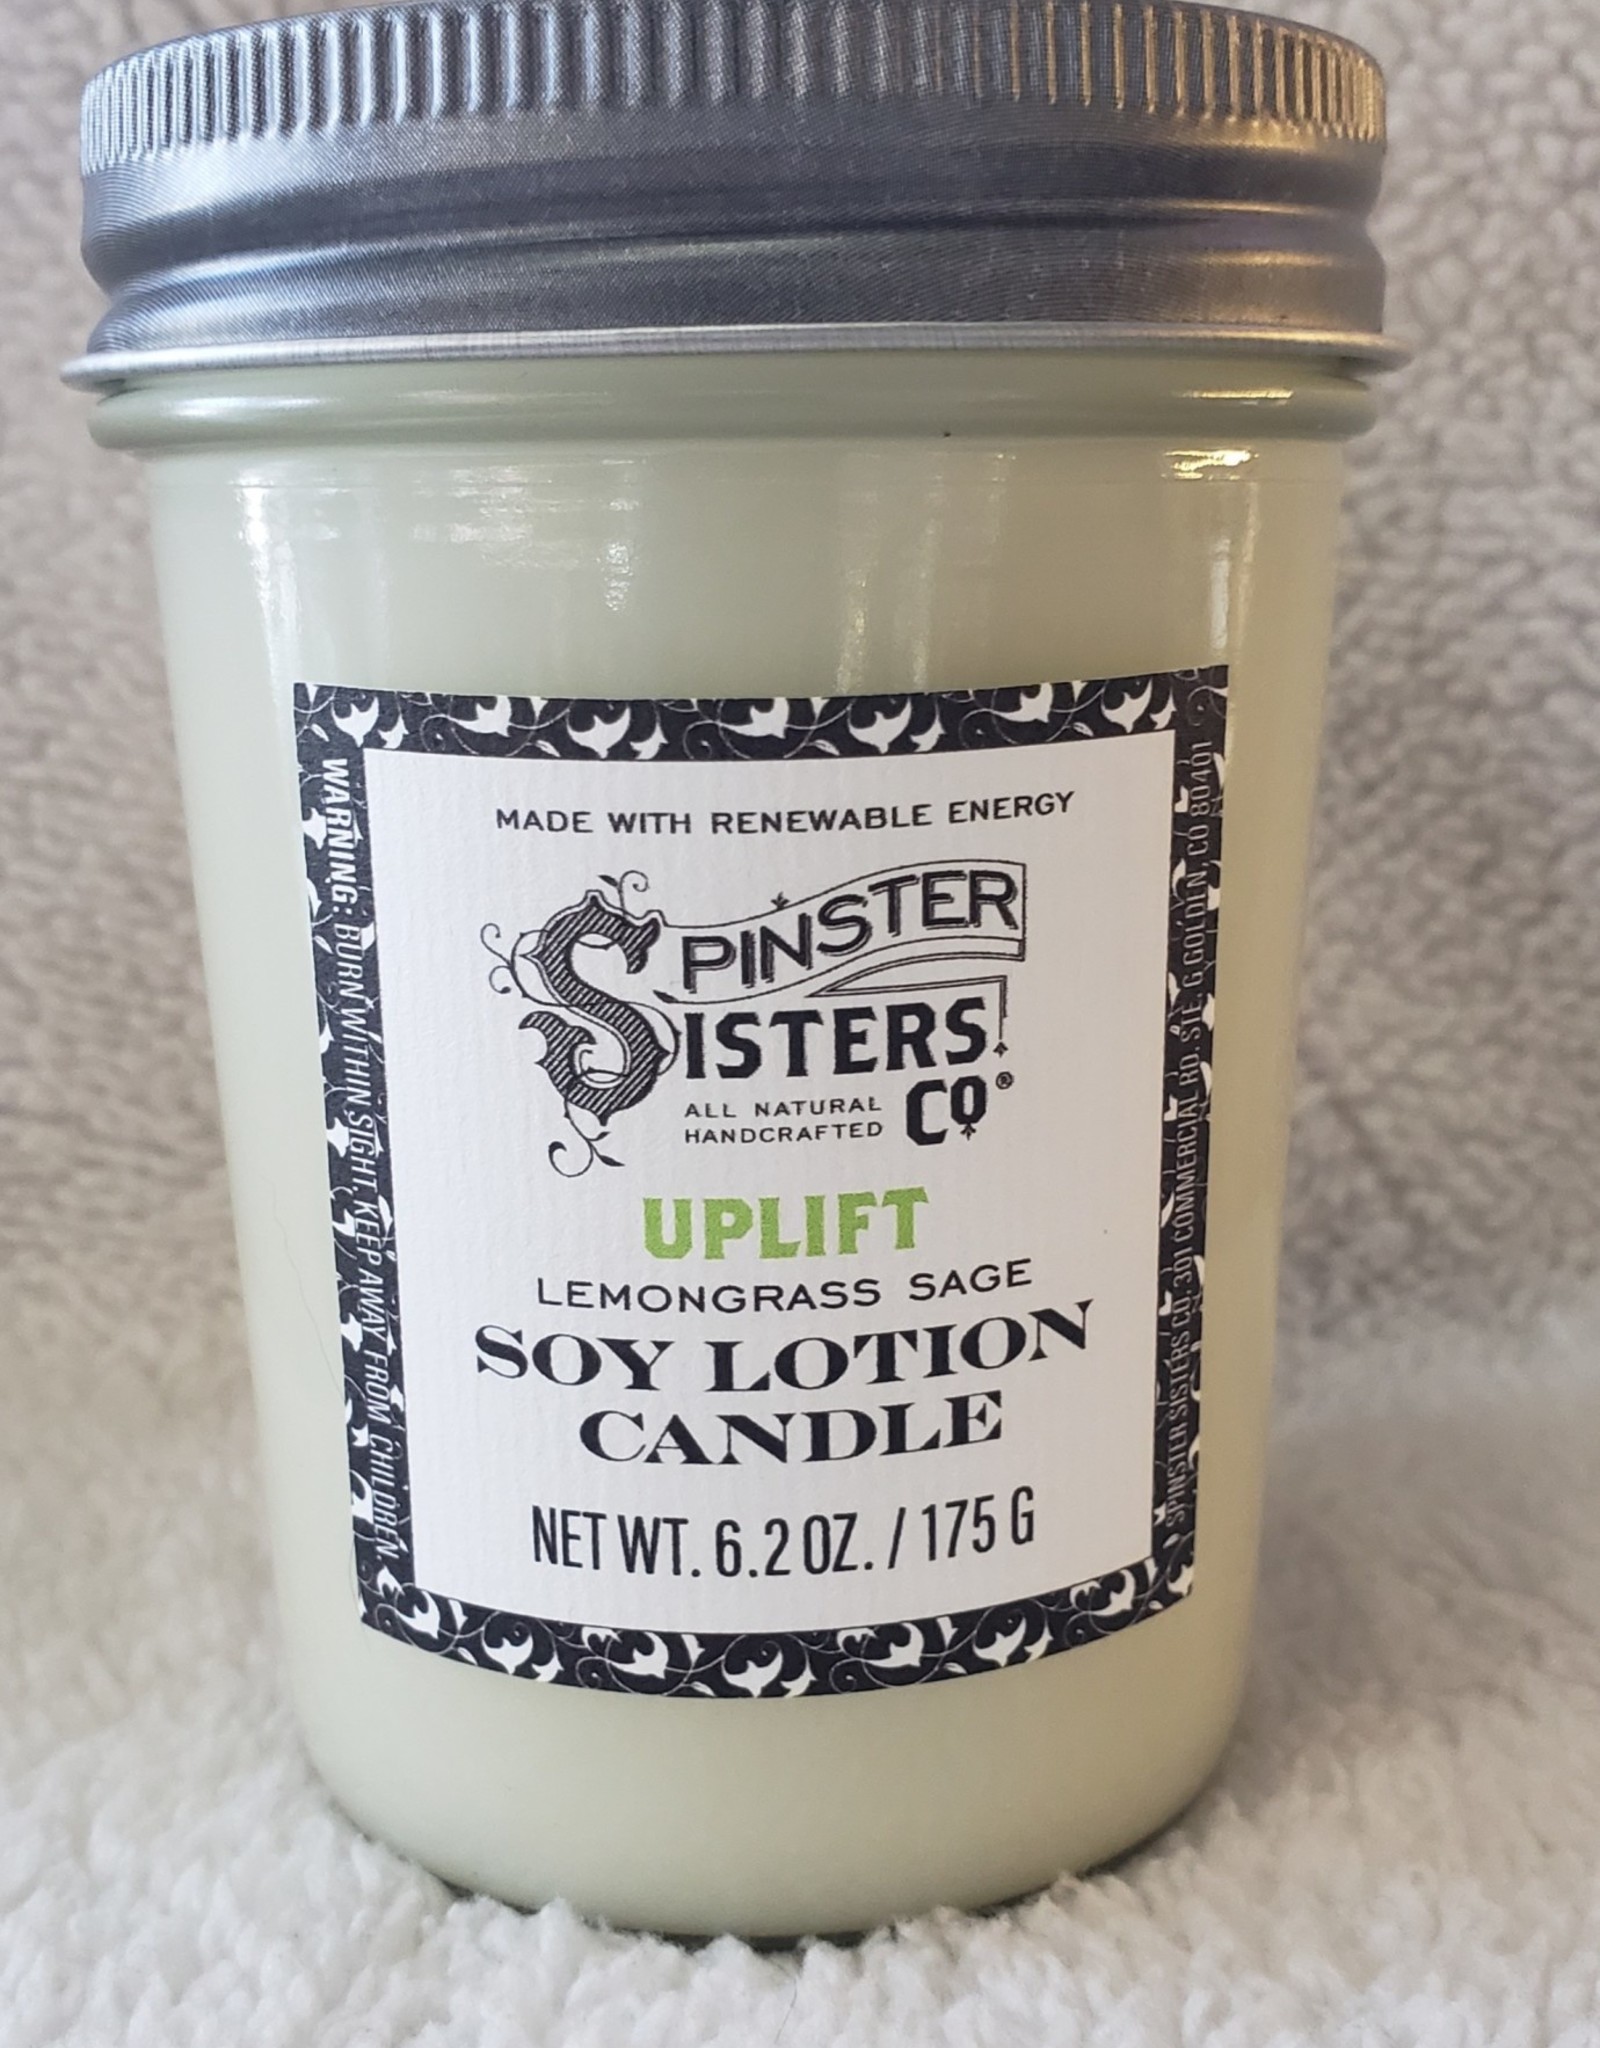 Spinster Sisters Co. Soy Lotion Candle 6.2 oz. | Uplift